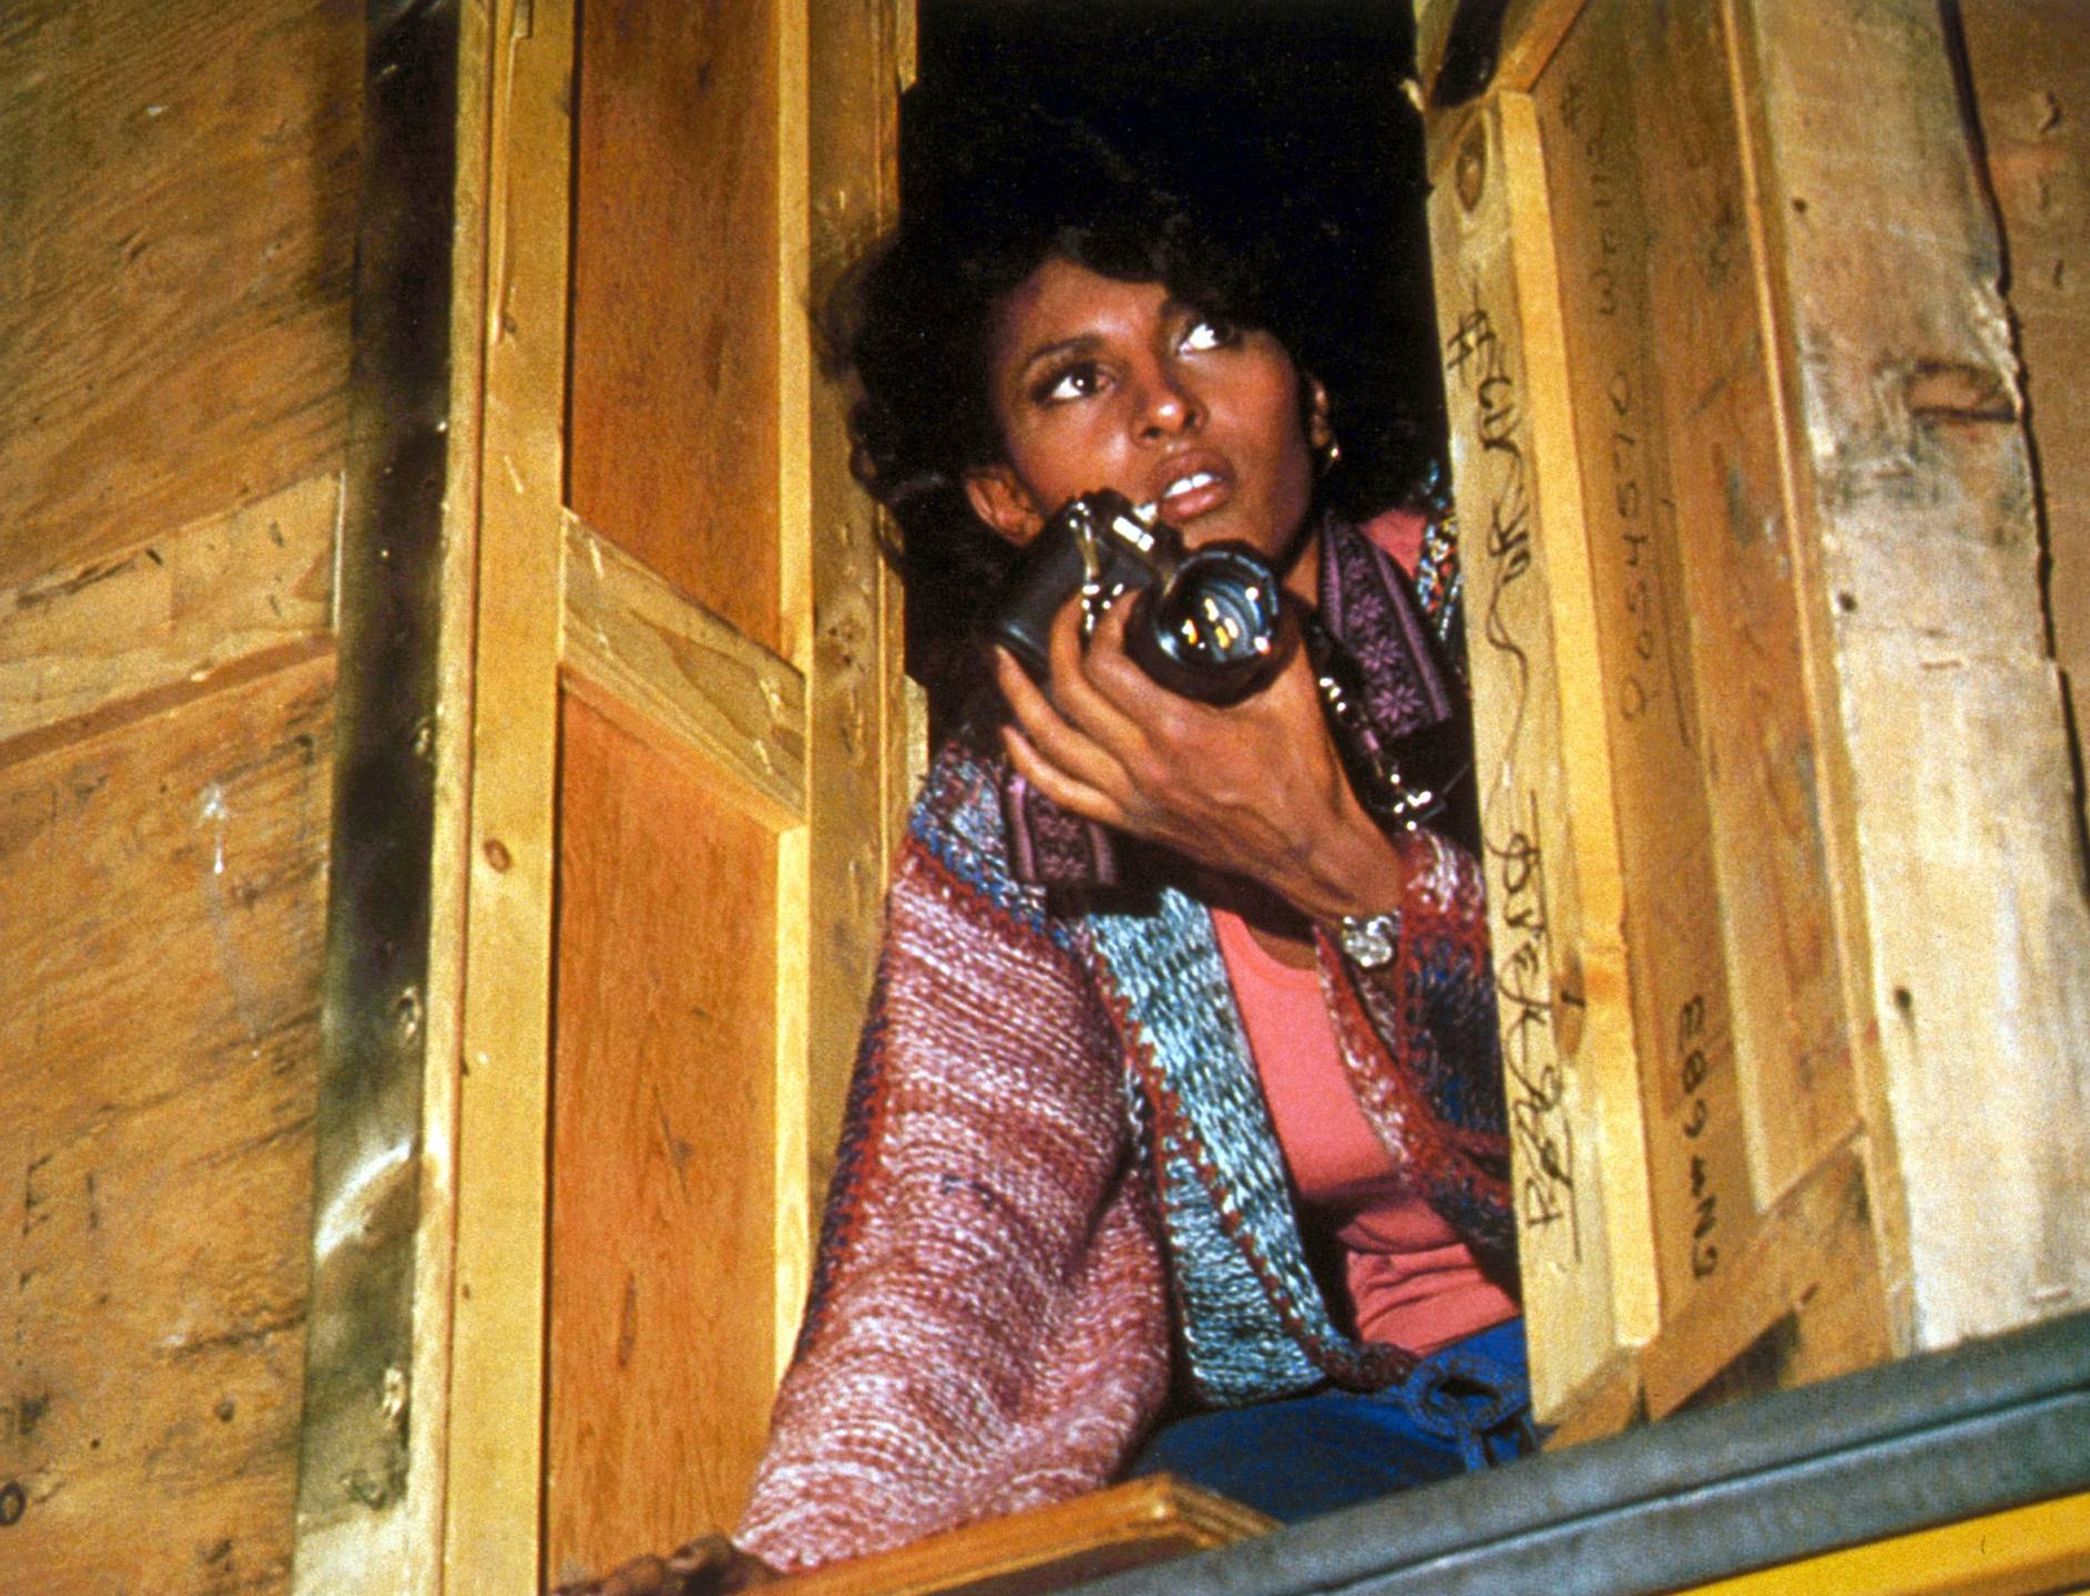 "Wham! Bam! Here Comes Pam" was the tagline for "Friday Foster" (1975), directed by Arthur Marks; it also inspired season four's title of "The Plot Thickens." (Shown: Pam Grier)